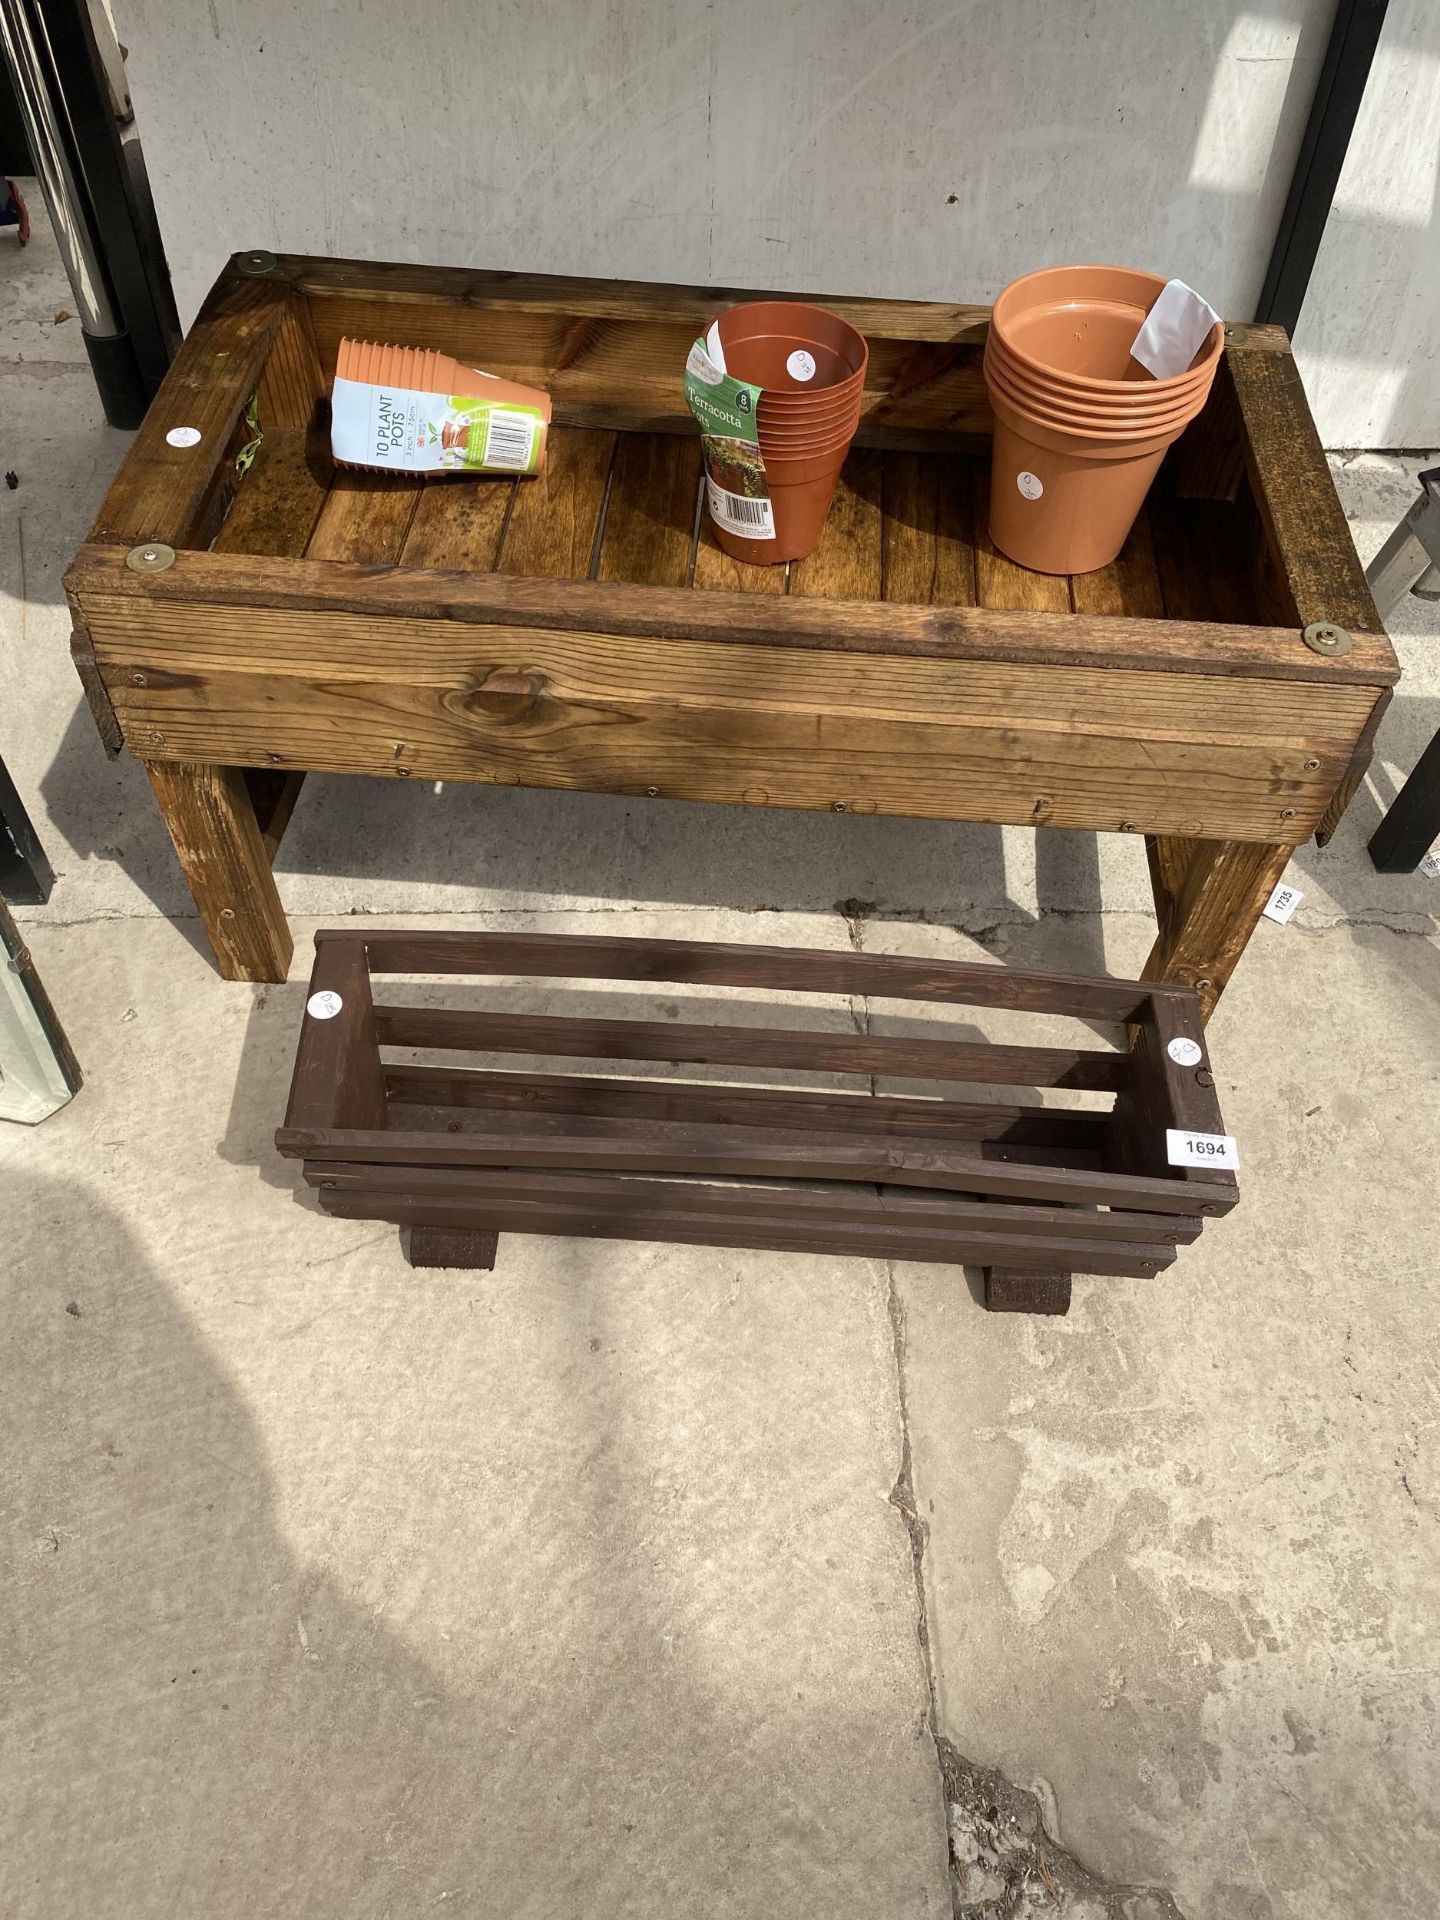 A WOODEN PLANTER, A SMALL WOODEN TROUGH AND VARIOUS PLASTIC PLANT POTS